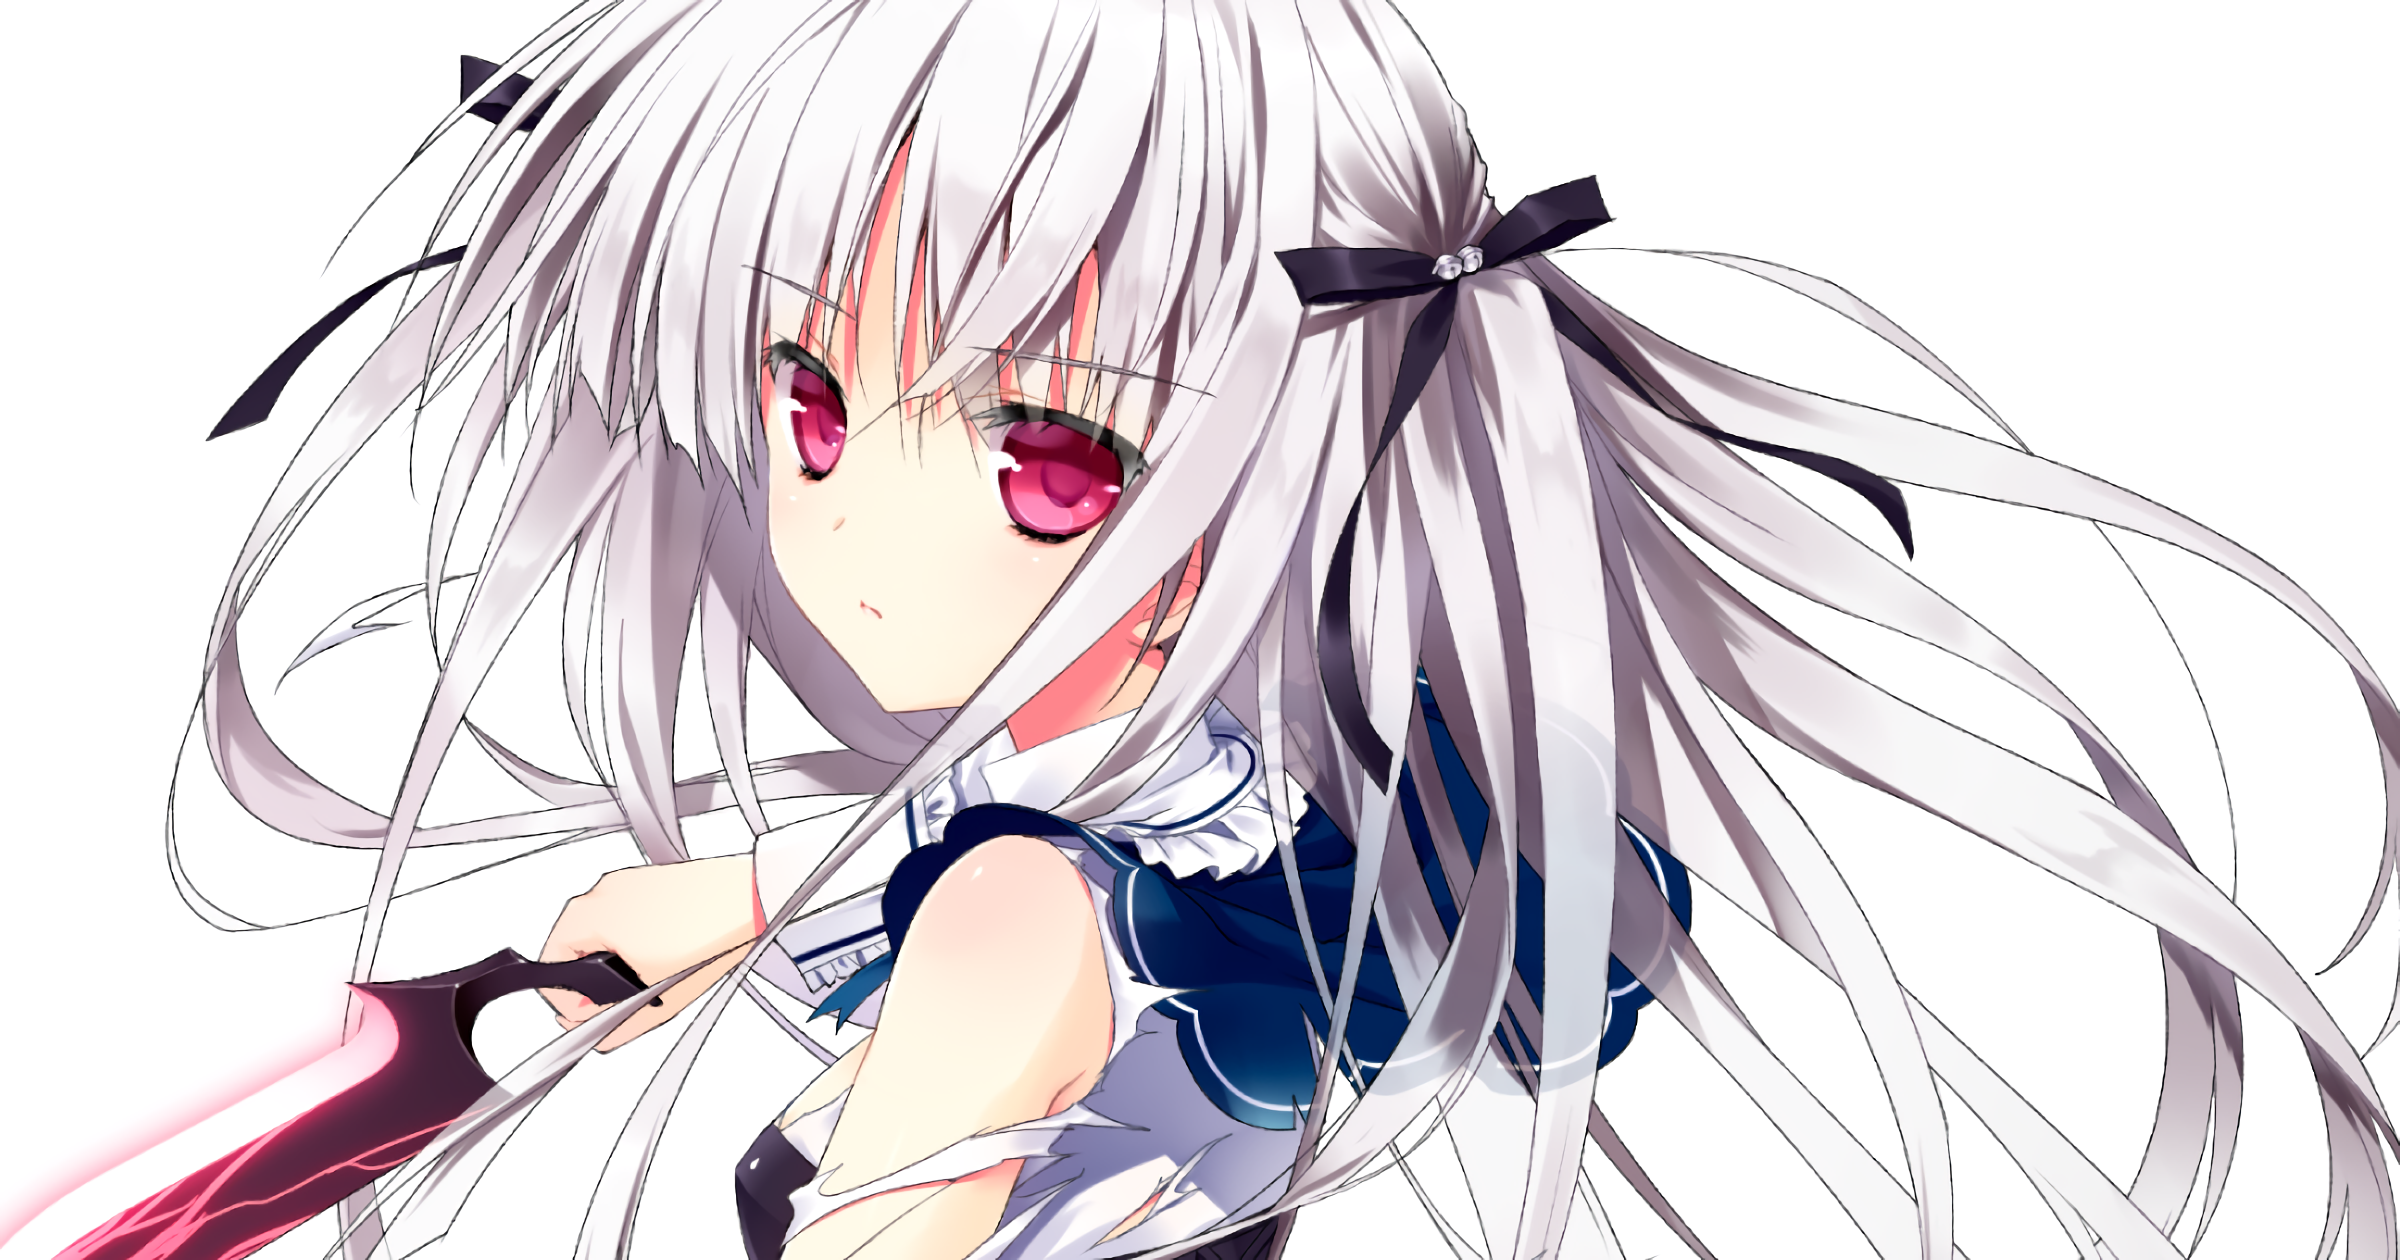 yurie sigtuna (absolute duo)